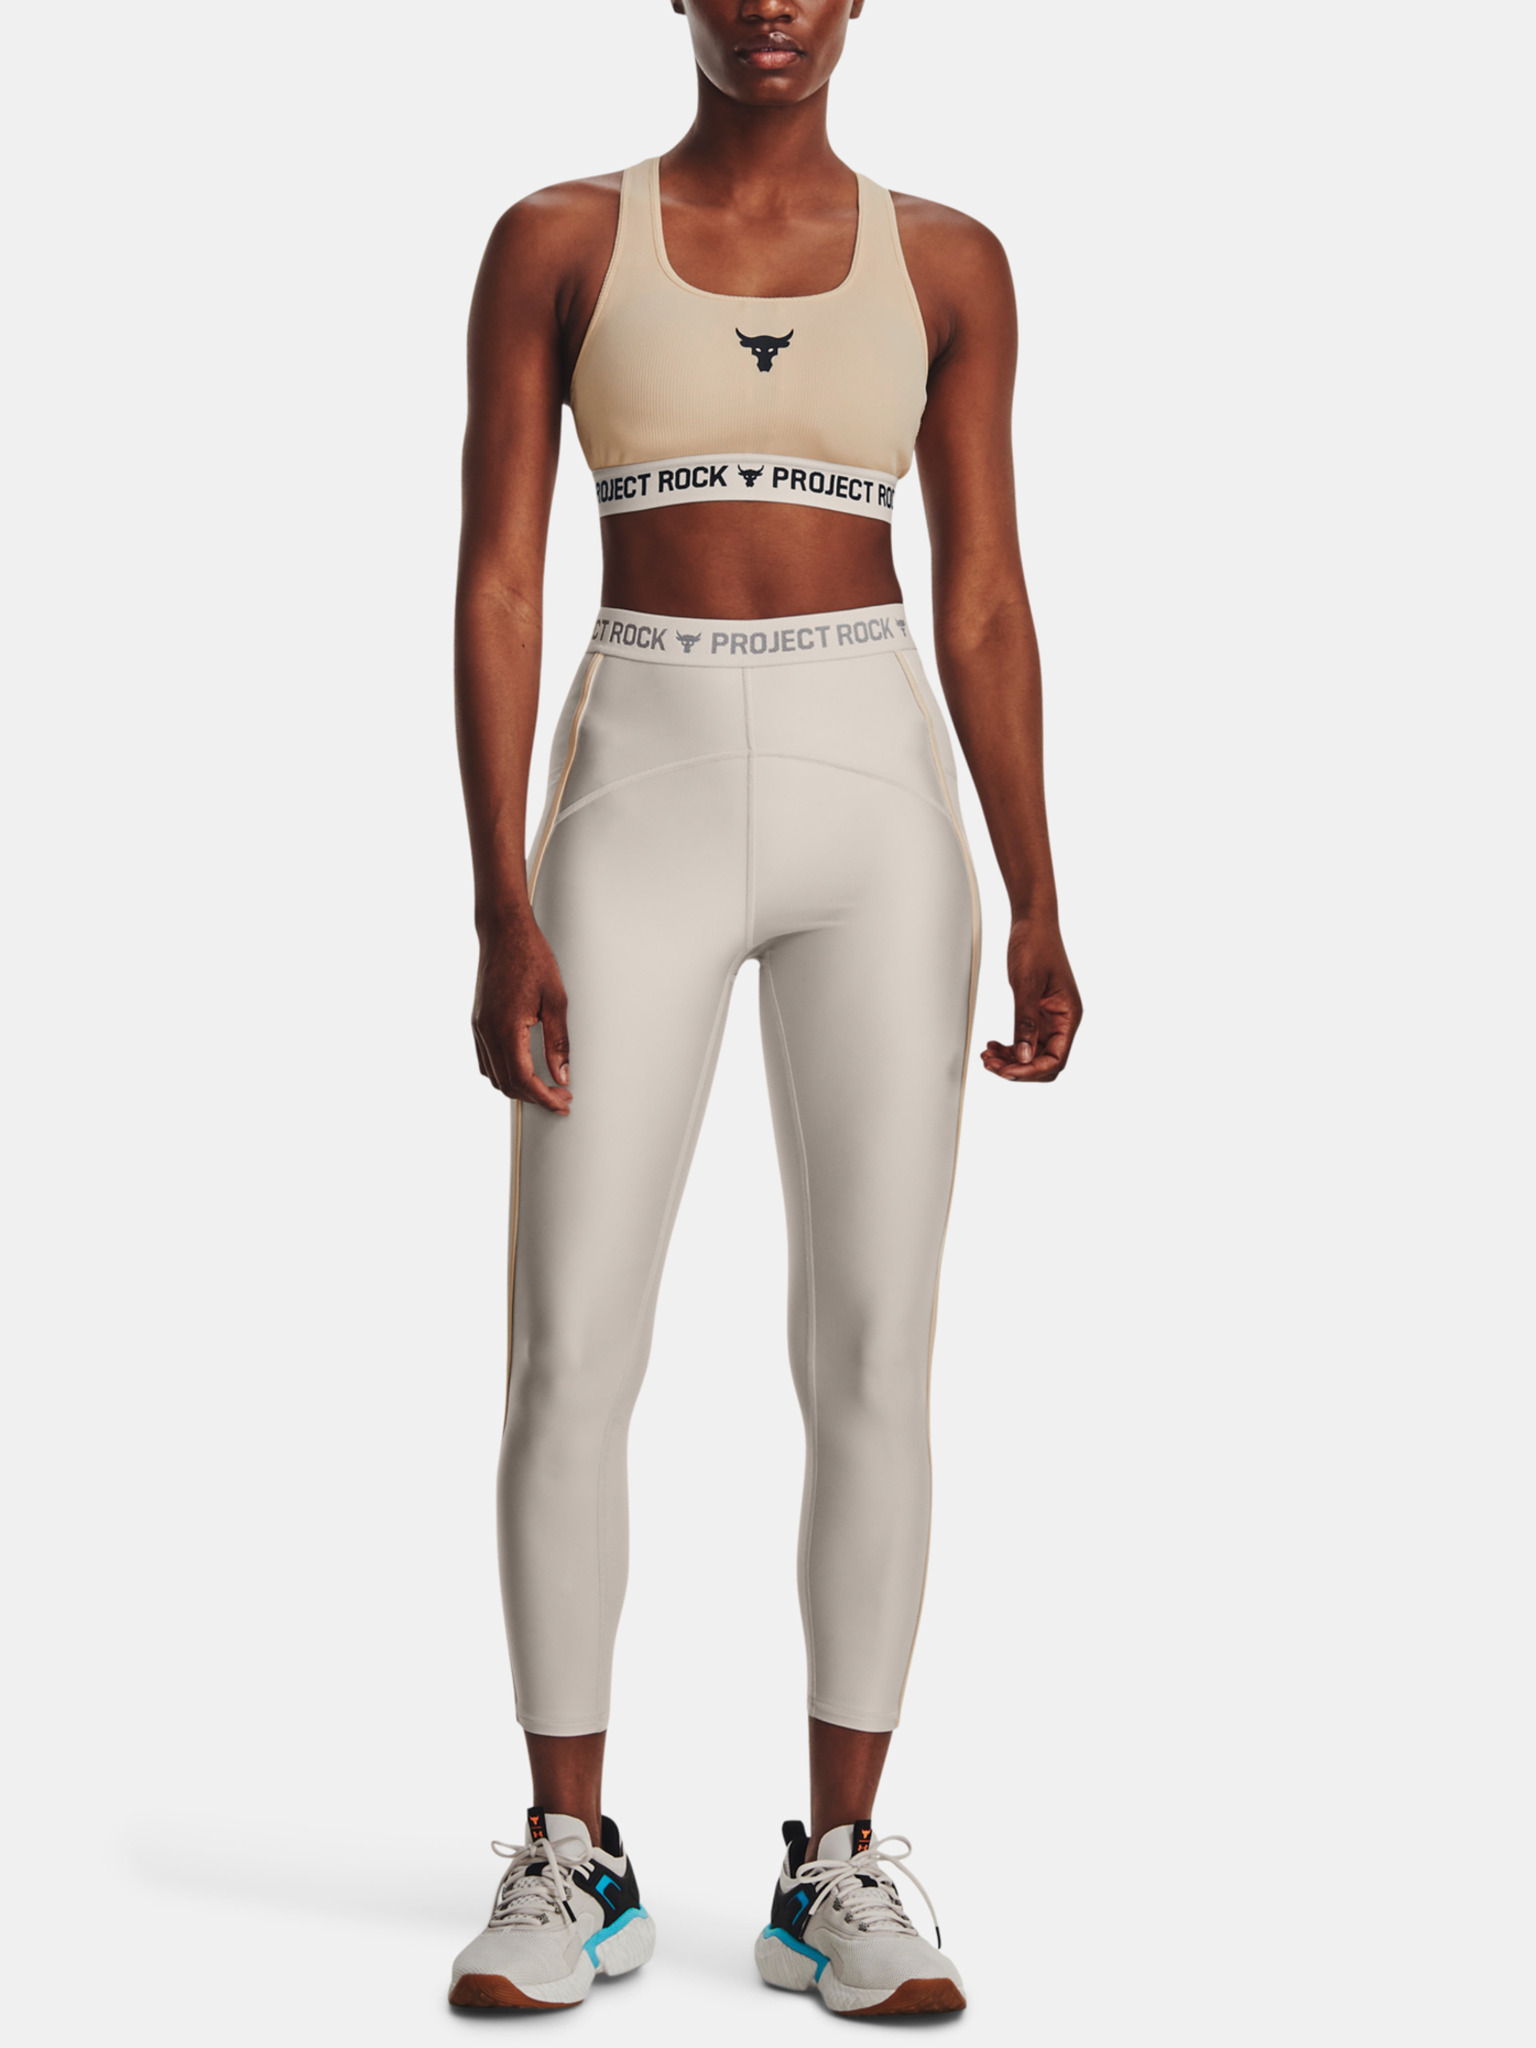 Under Armour Leggings Black - Grinnell College Golf Course